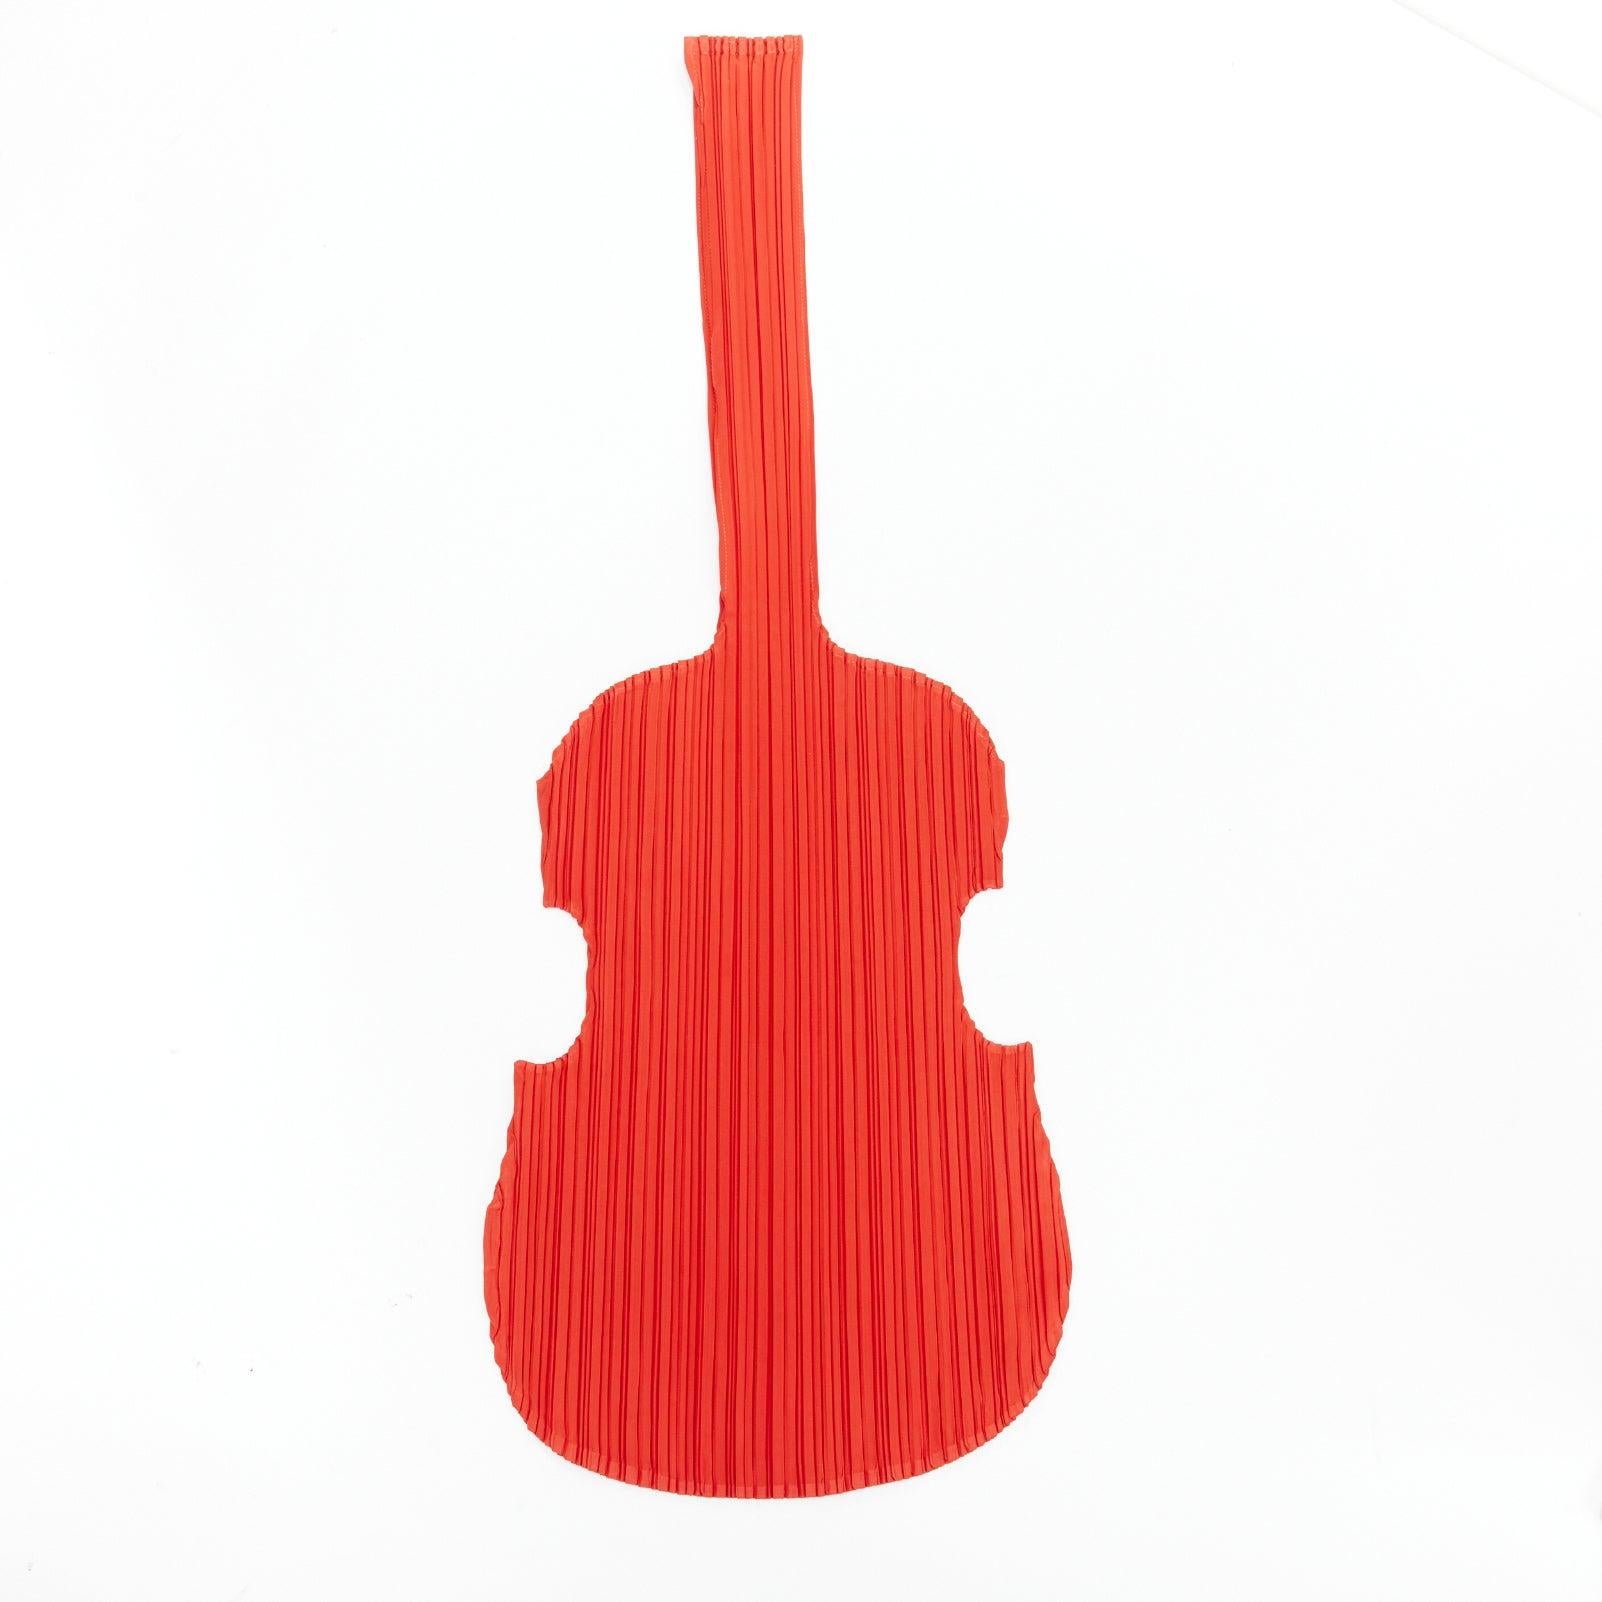 Women's ISSEY MIYAKE PLEATS PLEASE rare limited edition red plisse guitar tote bag